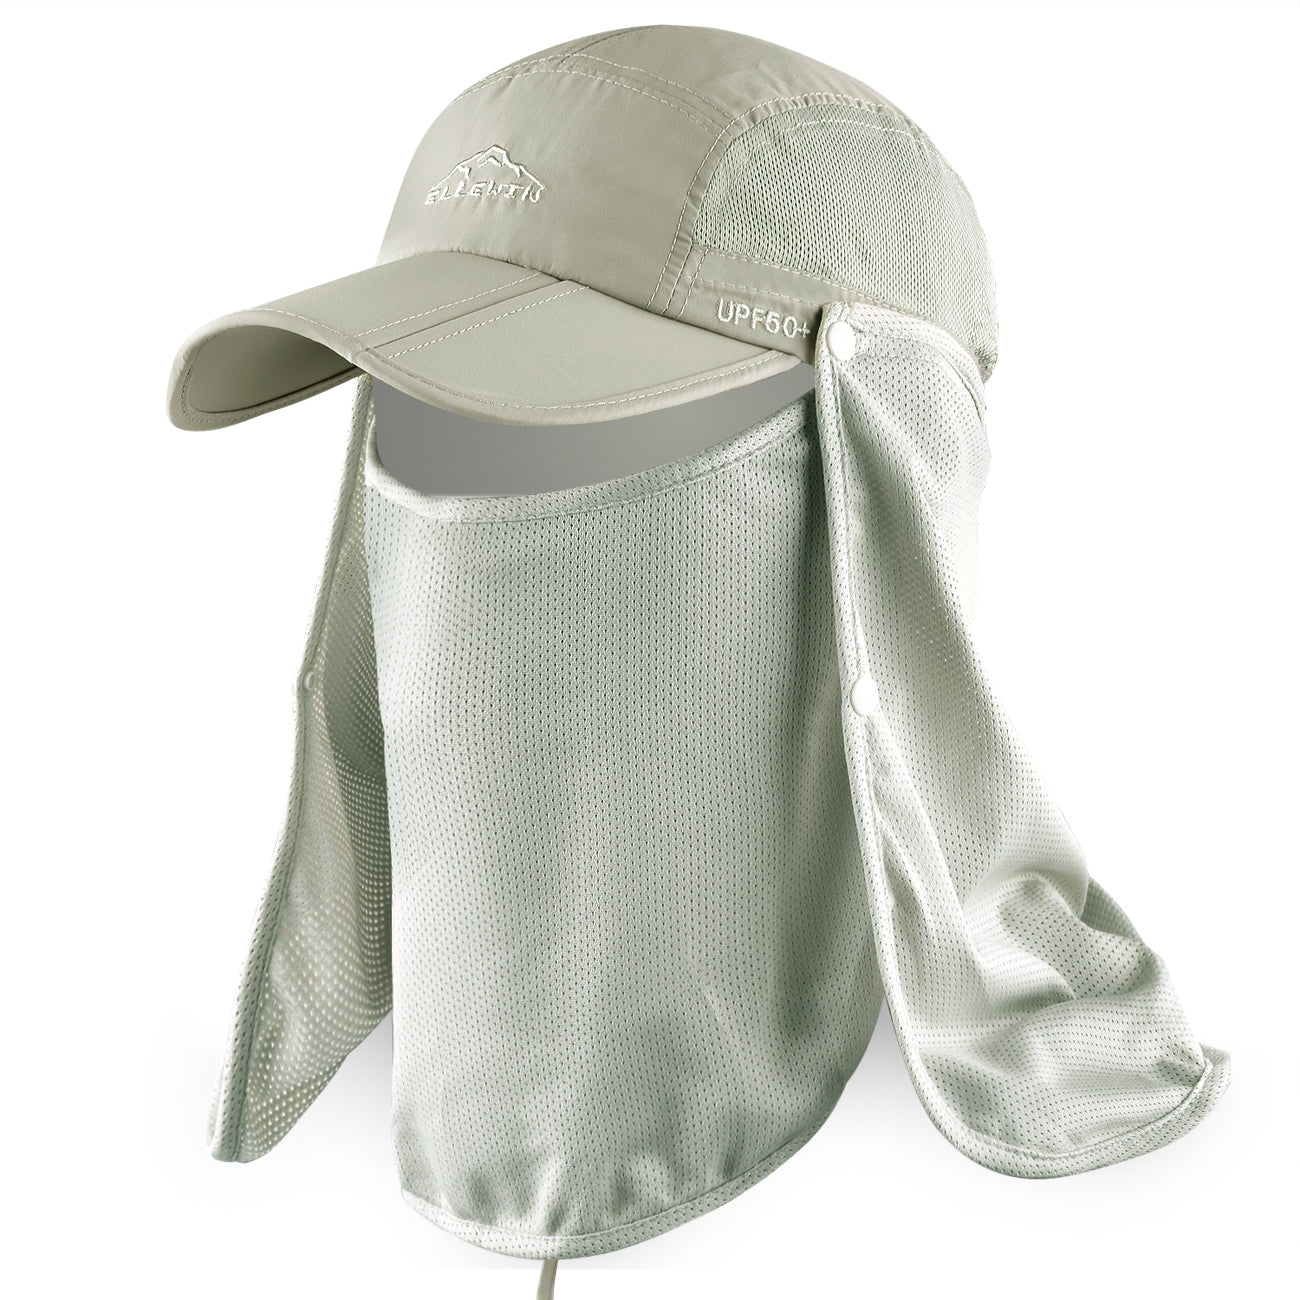 ELLEWIN Fishing Hat with Face and Neck Face Flap for Sun Protection